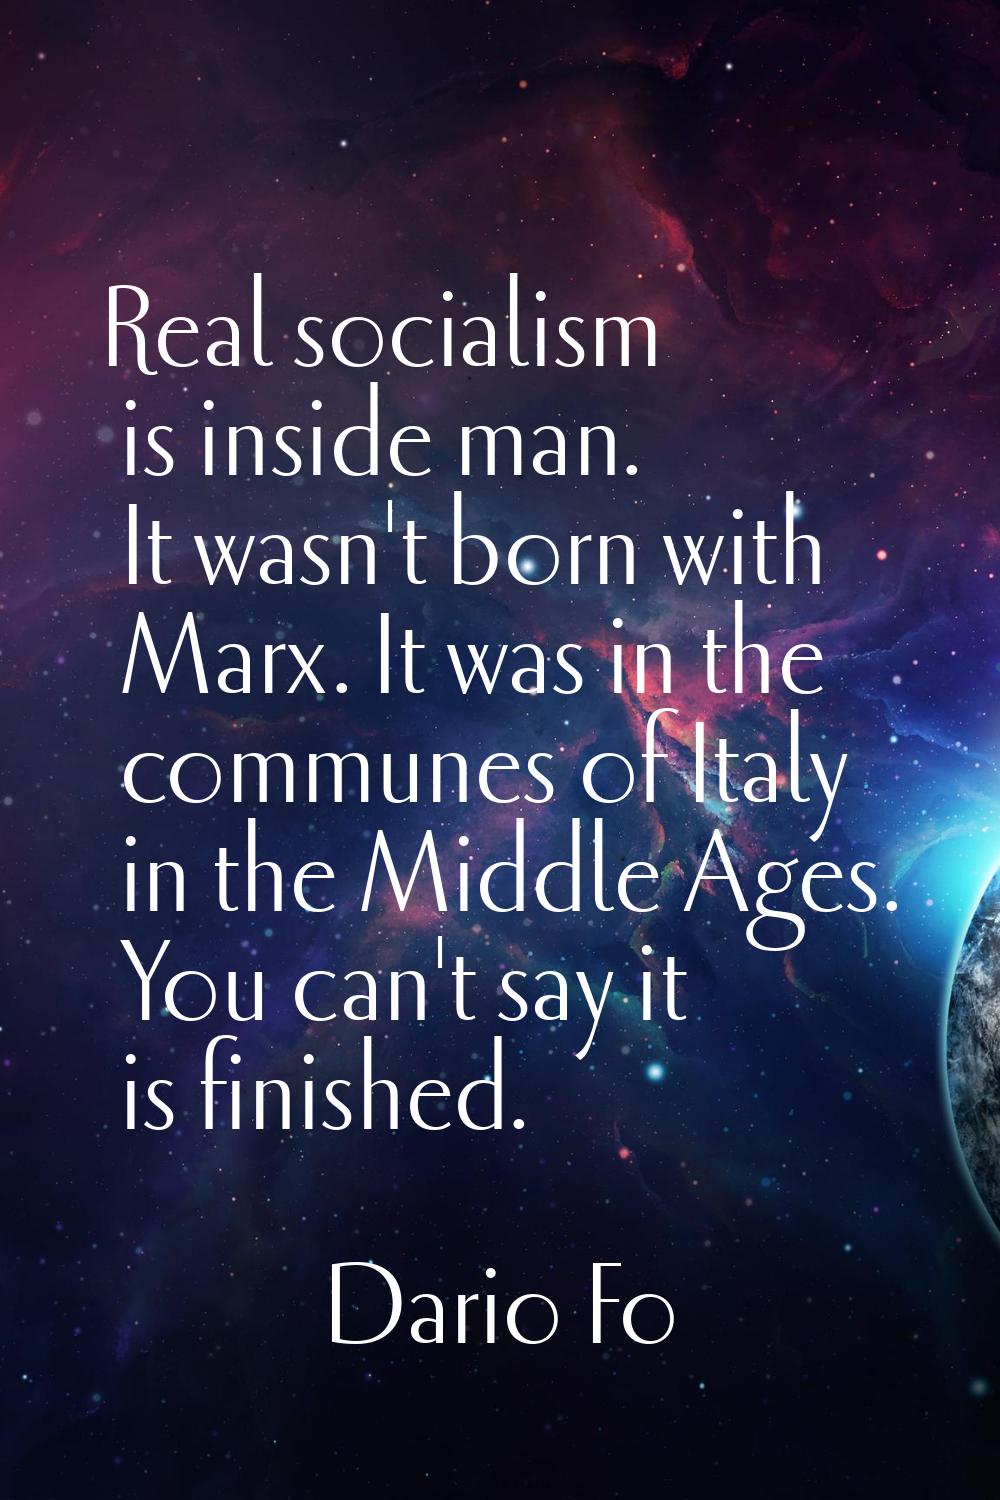 Real socialism is inside man. It wasn't born with Marx. It was in the communes of Italy in the Midd